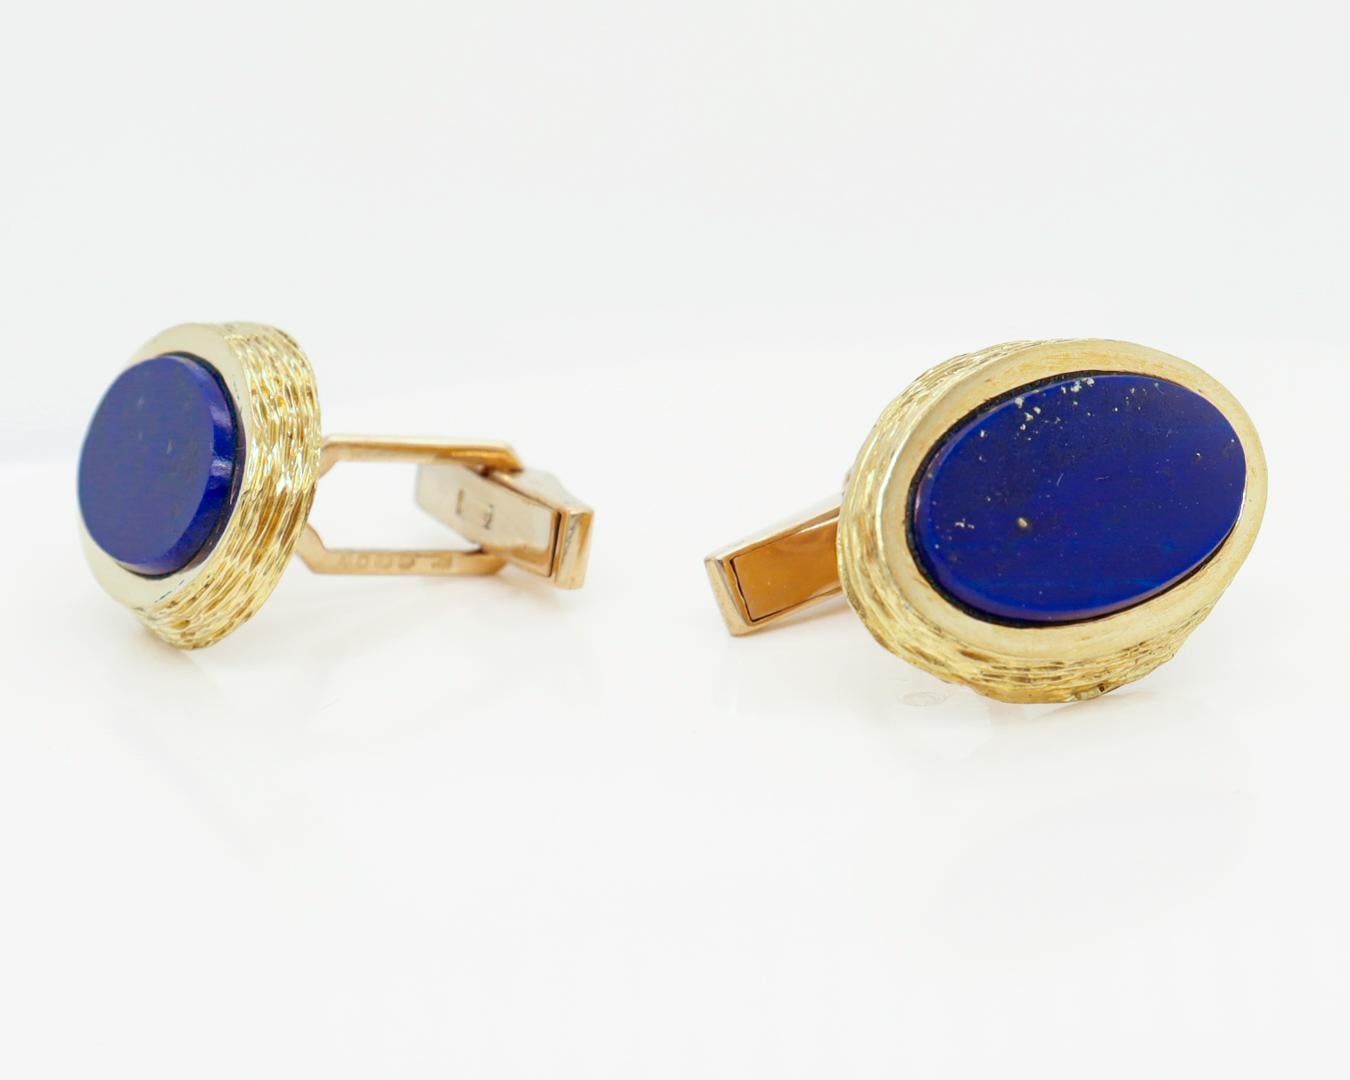 A fine pair of English Modernist cufflinks.

By Kutchinsky, the renowned London jewelry house.

In 18k gold and set with flat oval lapis cabochons.

Marked for 1970, a period in which Joseph Kutchinsky was at the height of his design